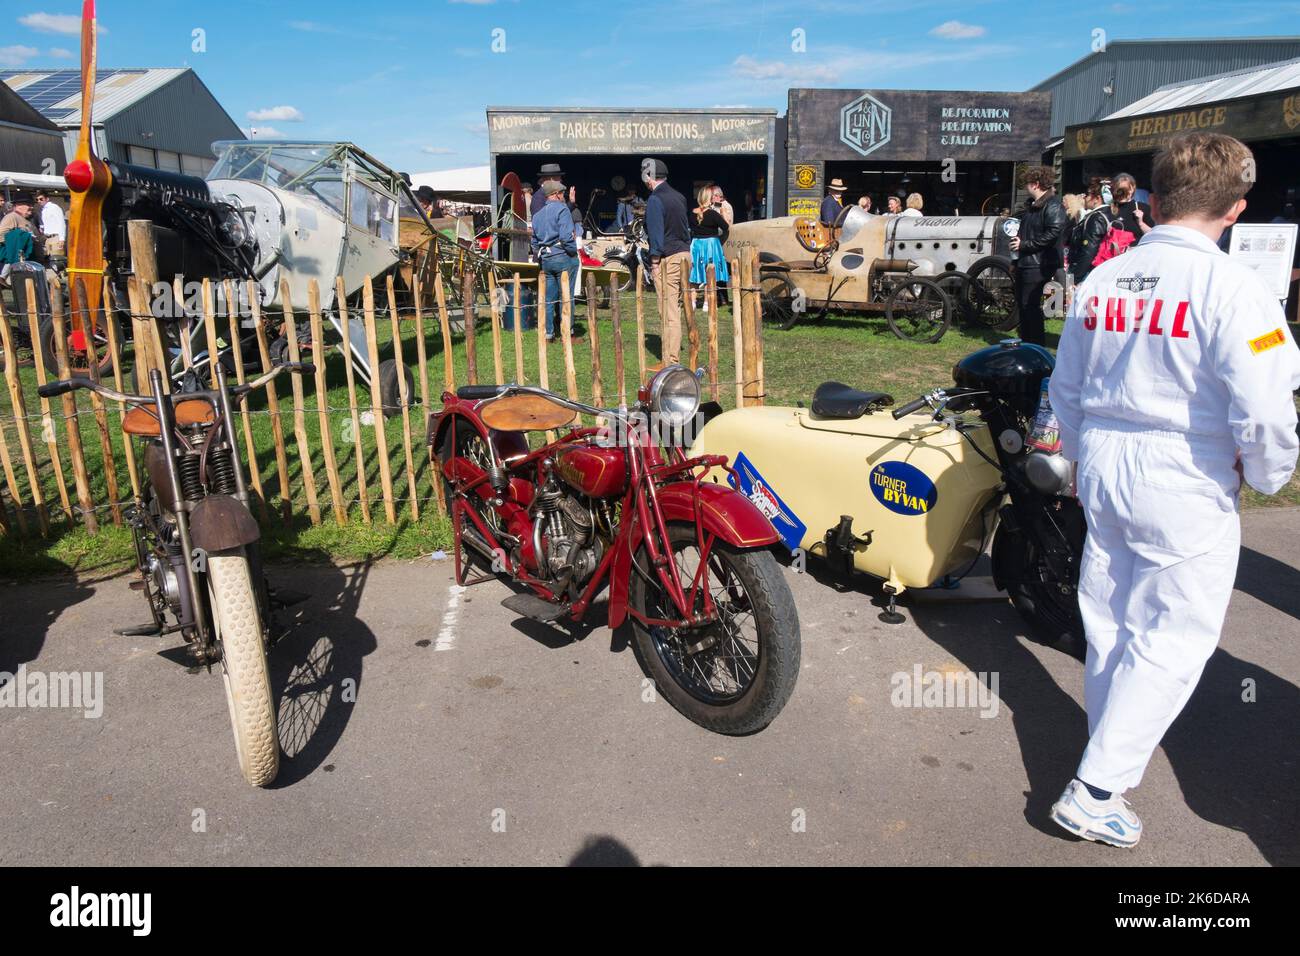 An Indian and Turner Byvan American motorcycles parked at the Restoration Yard, BARC Revival Meeting, Goodwood motor racing circuit, Chichester, UK Stock Photo